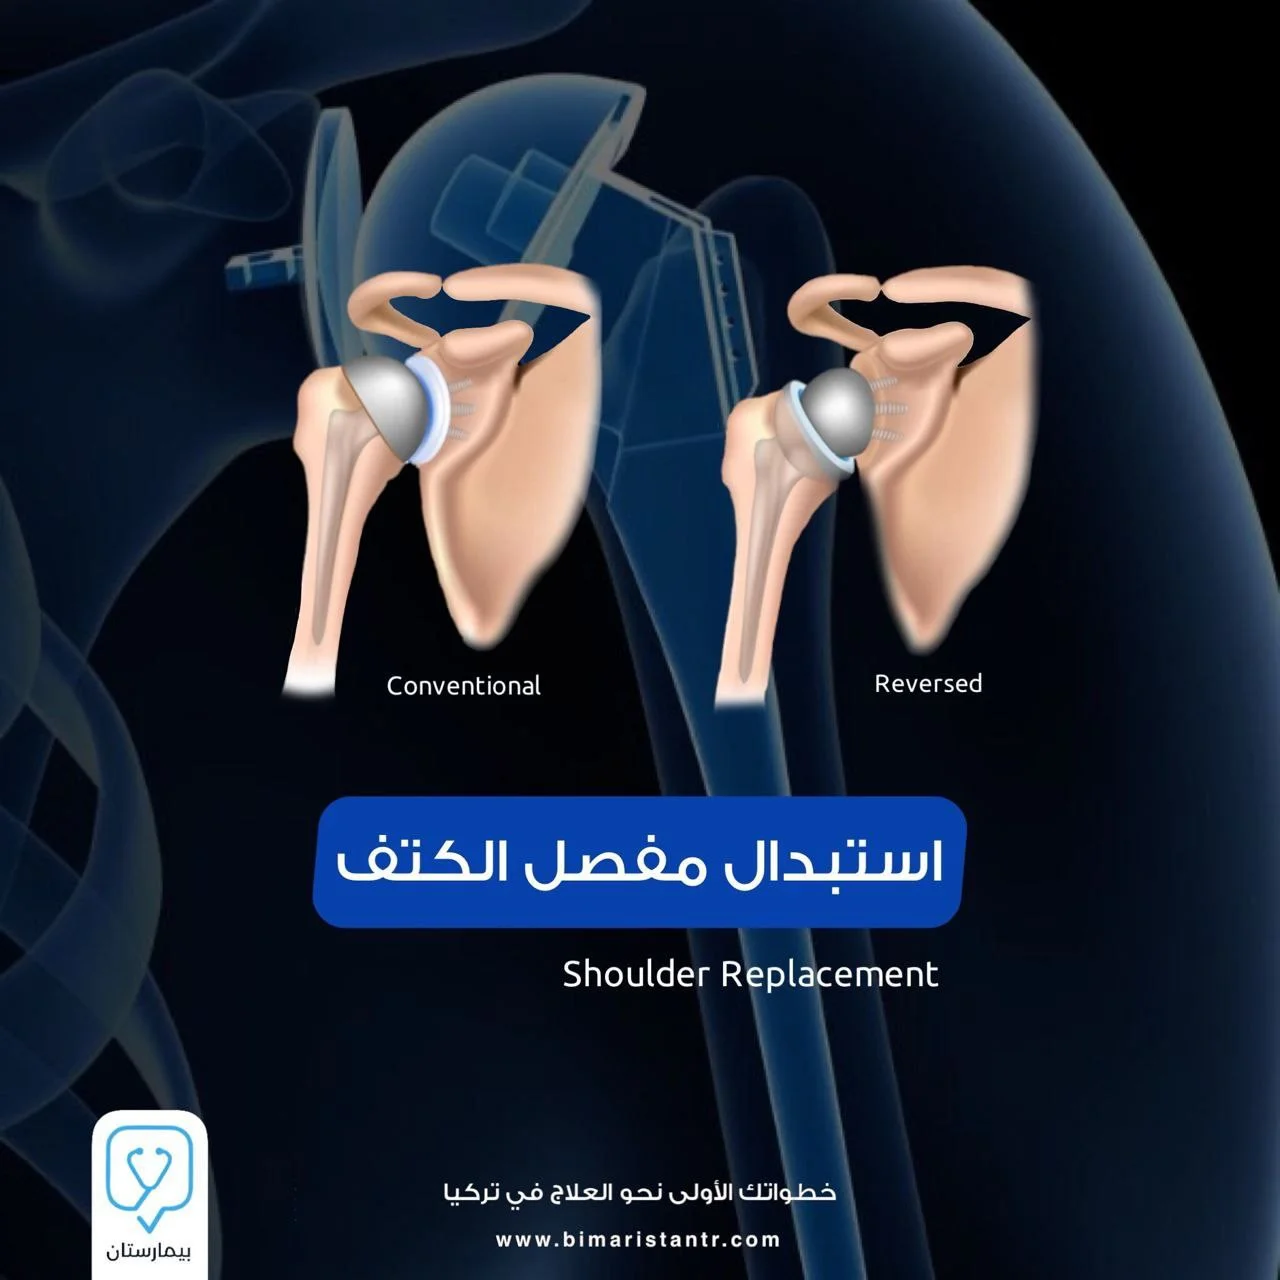 Shoulder-joint replacement